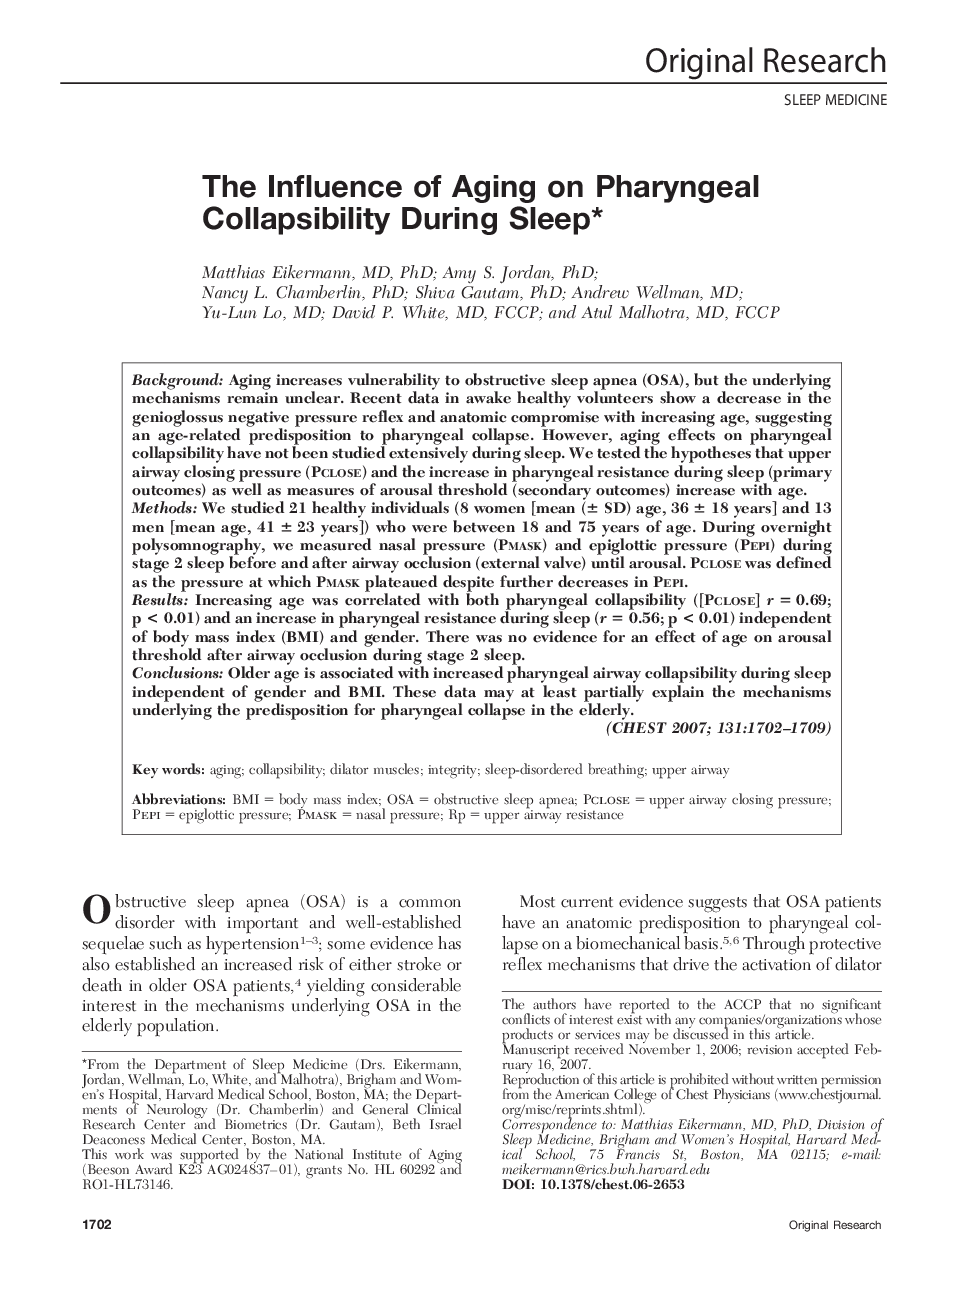 The Influence of Aging on Pharyngeal Collapsibility During Sleep 